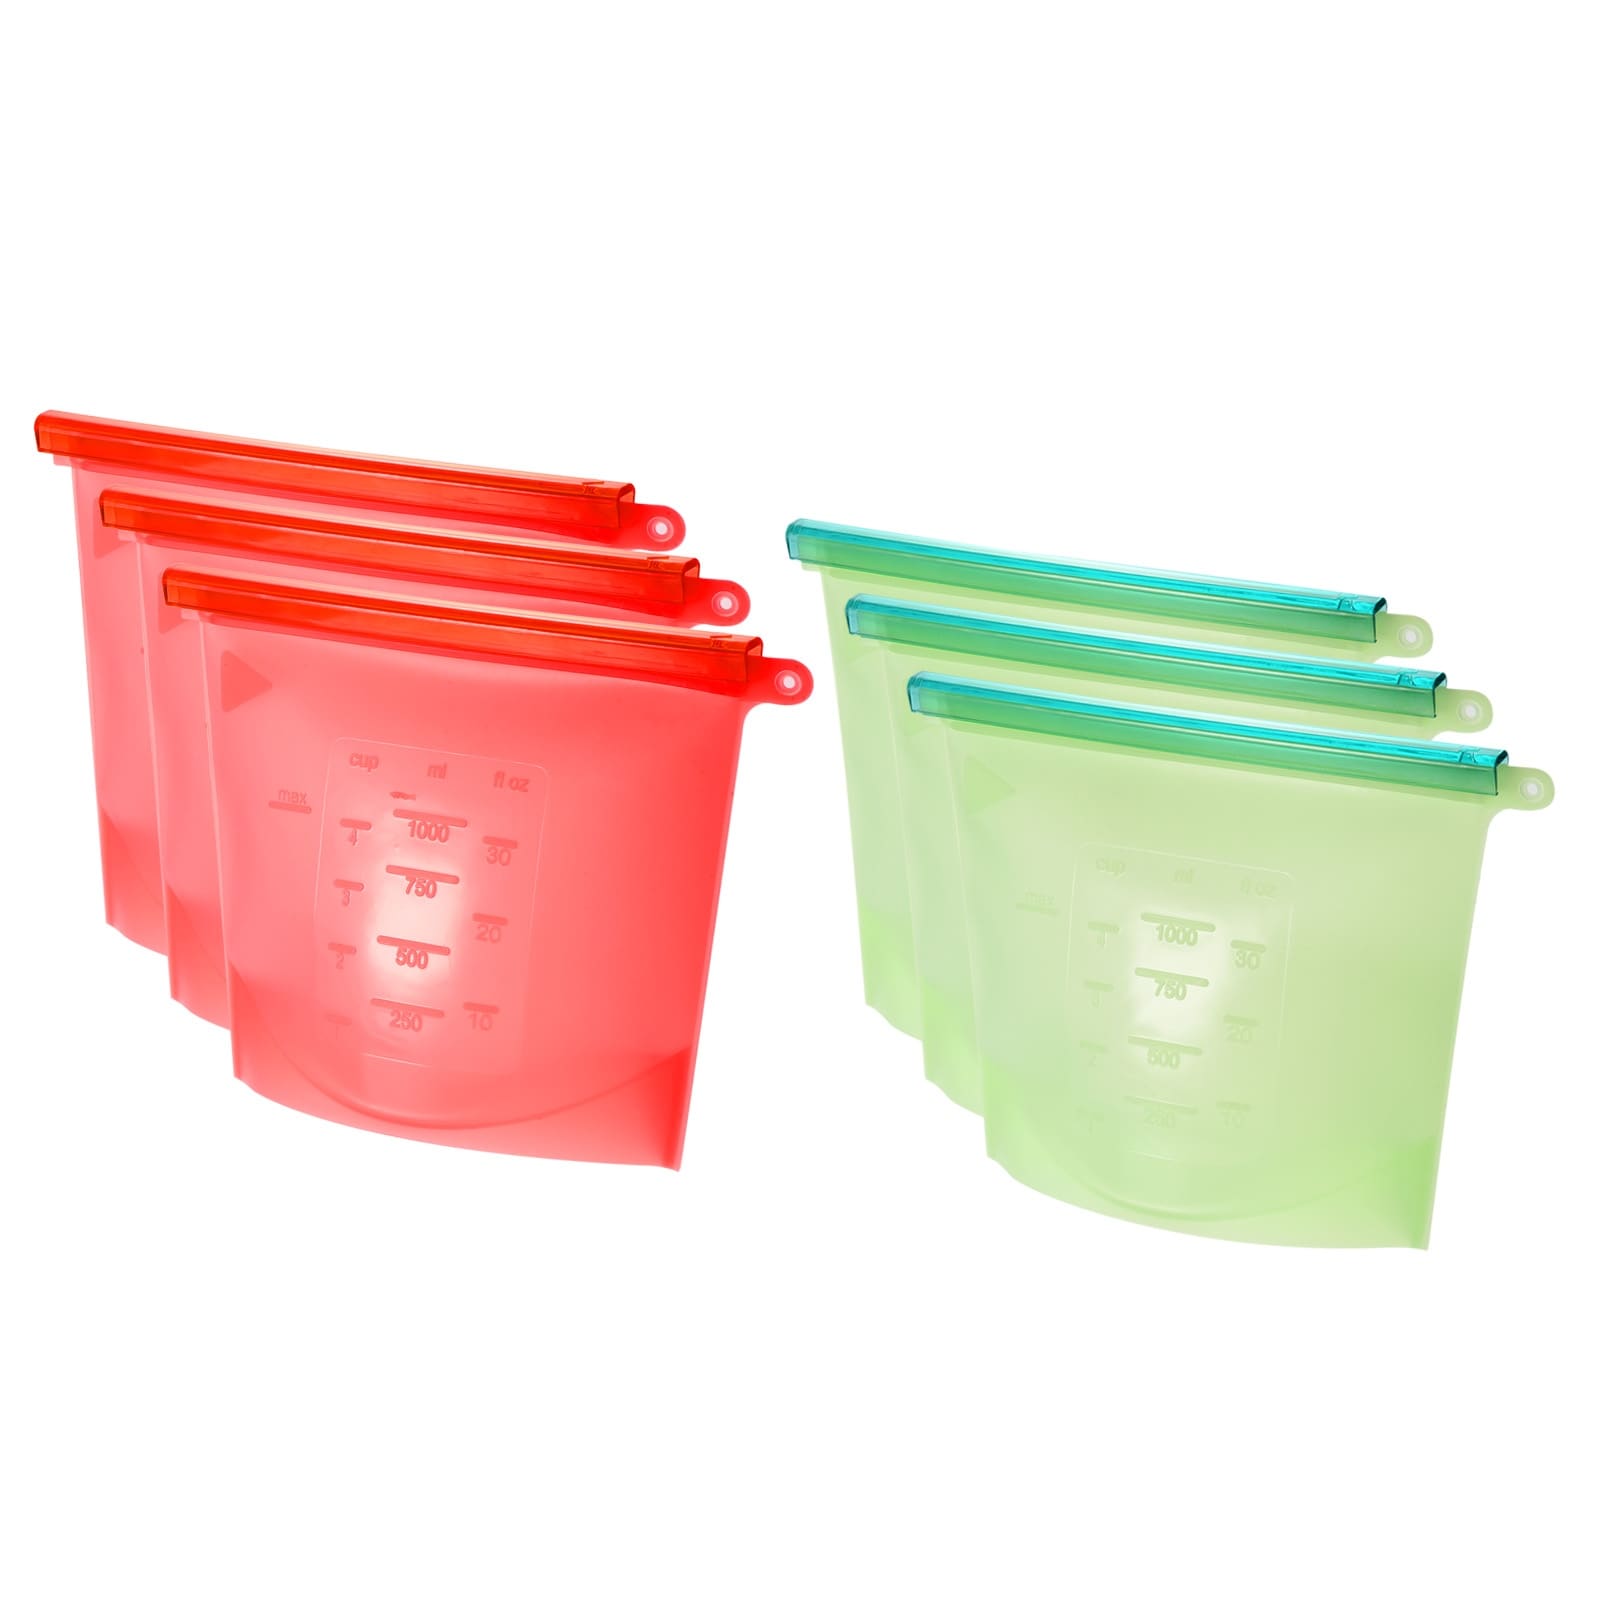 Basicwise 7 oz. Assorted Colors 2-Red, 2-Green, 2-Blue Freezer